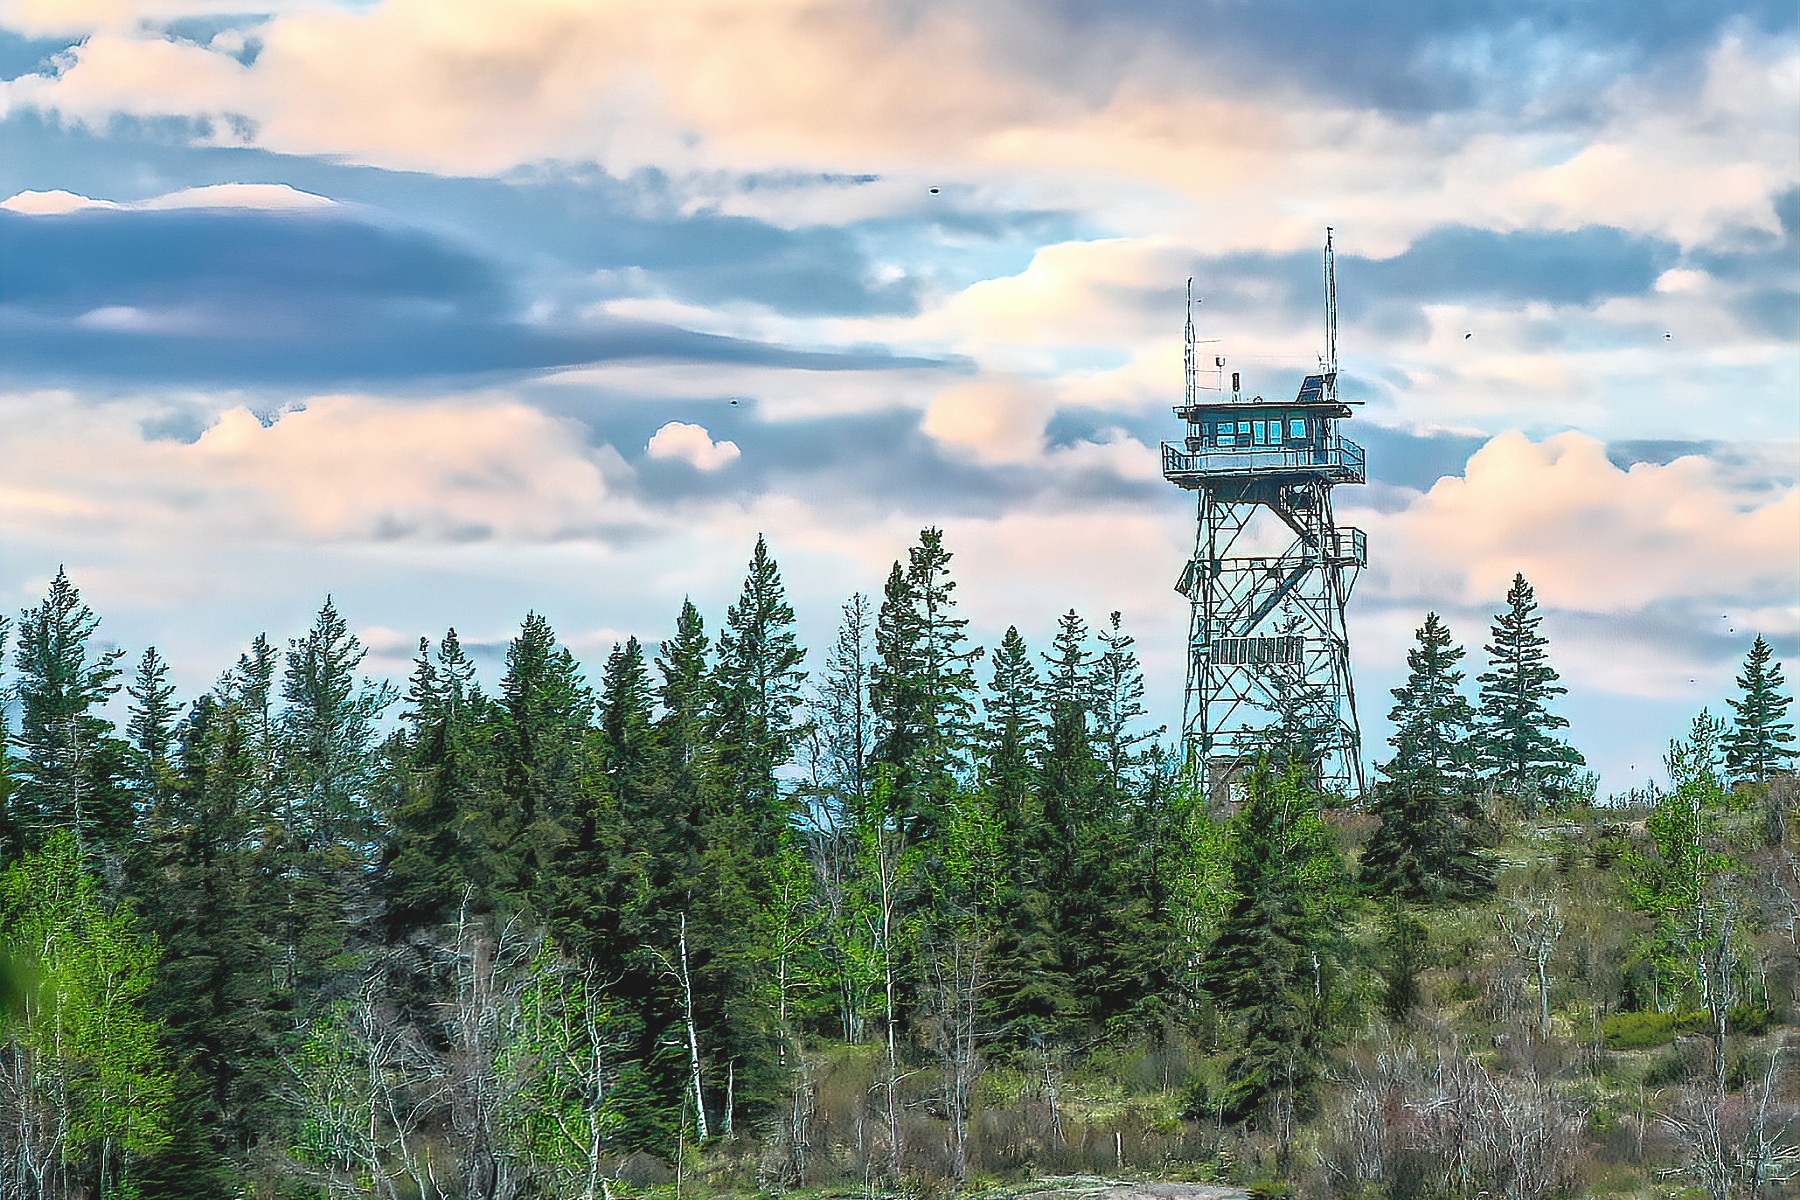 obijway fire tower in Isle Royale National Park with trees below and puffy clouds above. 